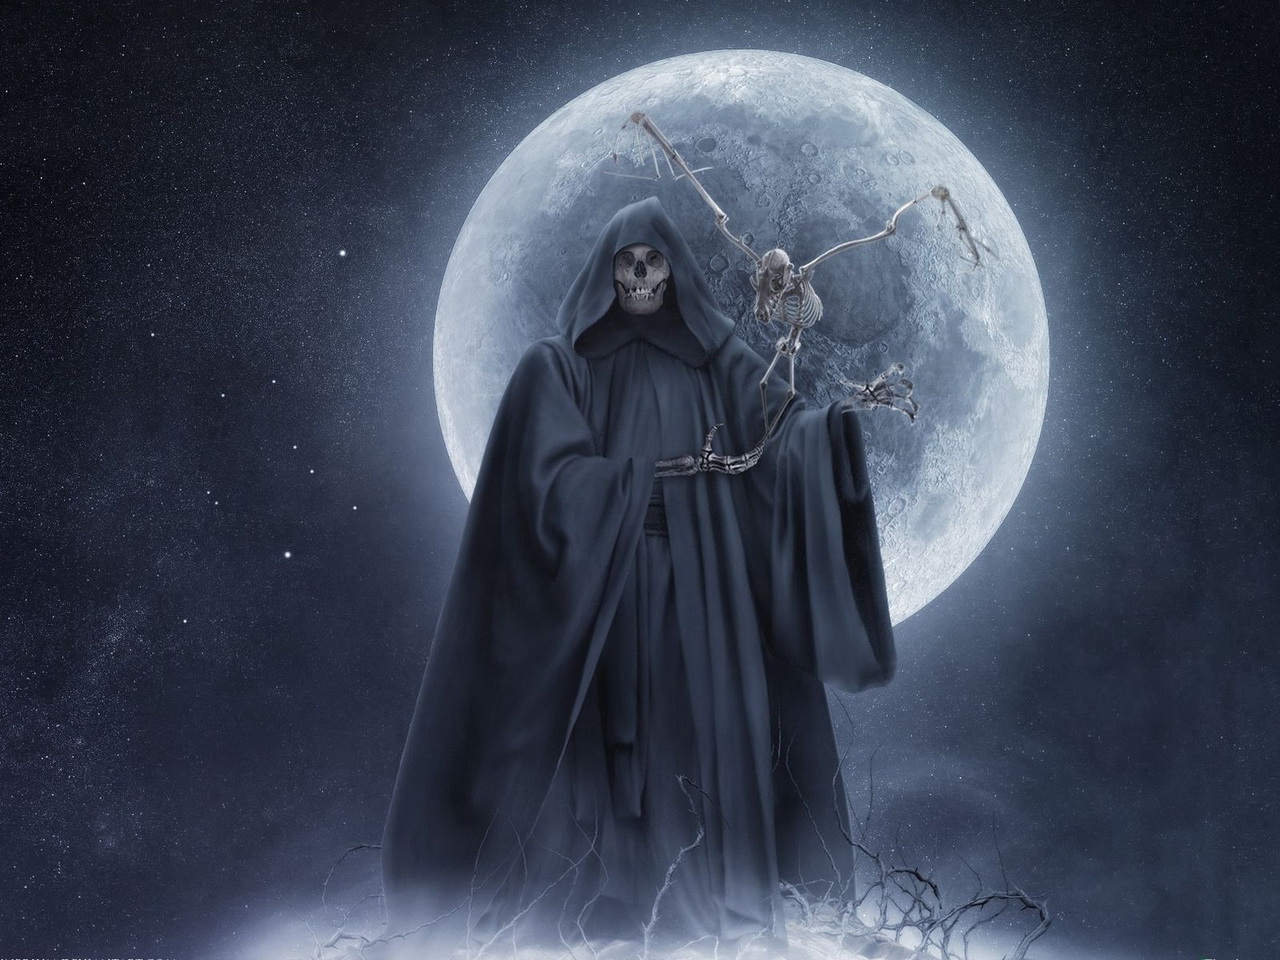 High Quality Pictures Of Grim Reaper Wallpaper | Full HD Pictures